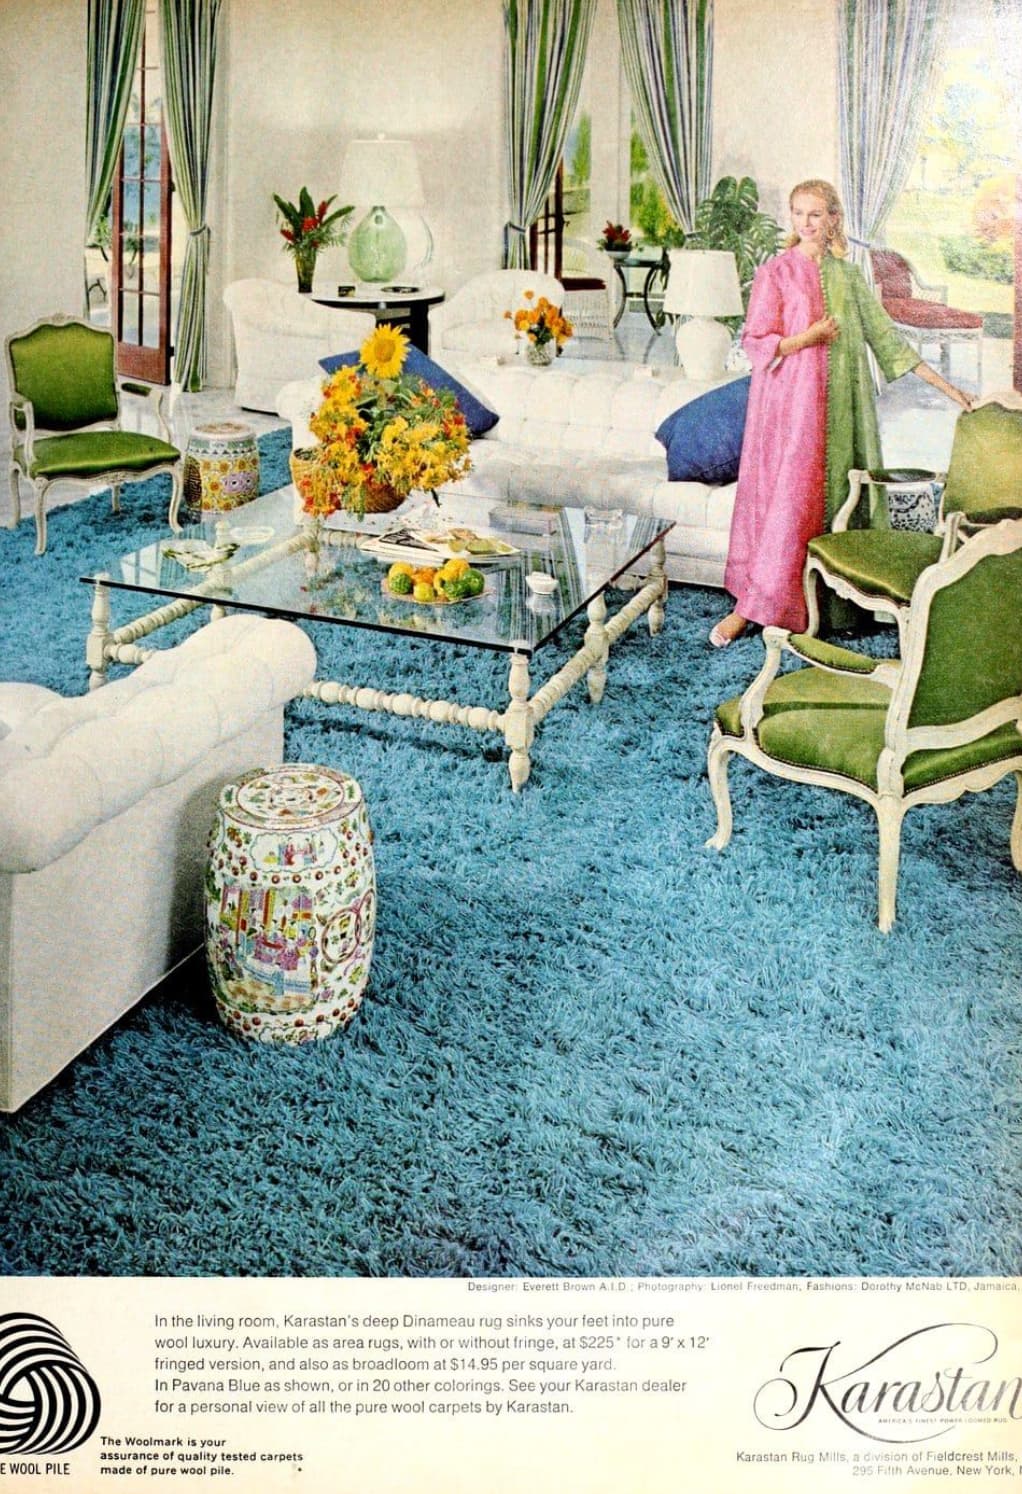 carpet 70s - E Wool Pile Designer Everett Brown A.Id Photography Lionel Freedman, Fashions Dorothy McNab Ltd, Jamaica, In the living room, Karastan's deep Dinameau rug sinks your feet into pure wool luxury. Available as area rugs, with or without fri